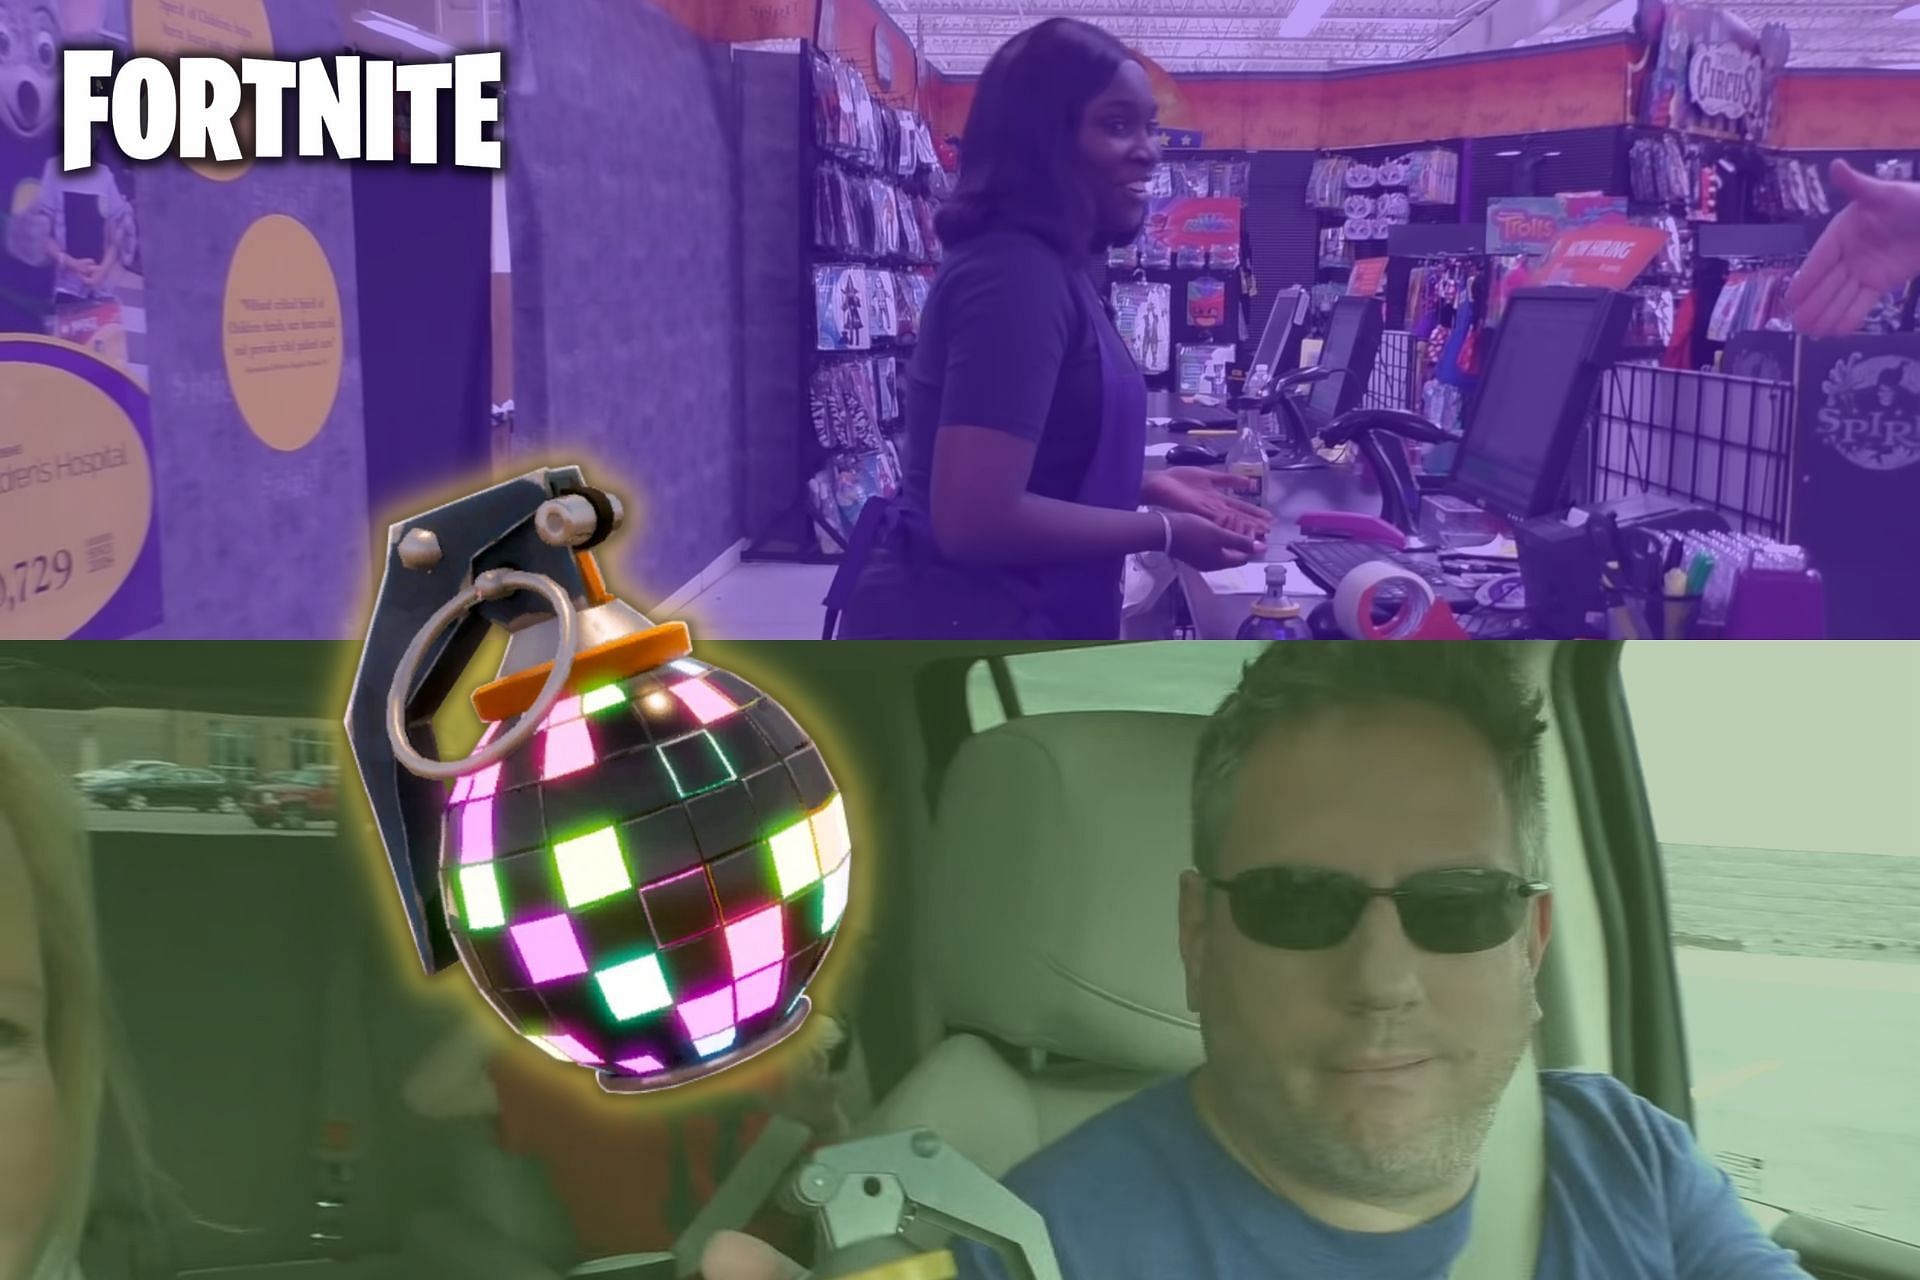 The real-life Fortnite Boogie Bomb challenge is not as appealing as the in-game version